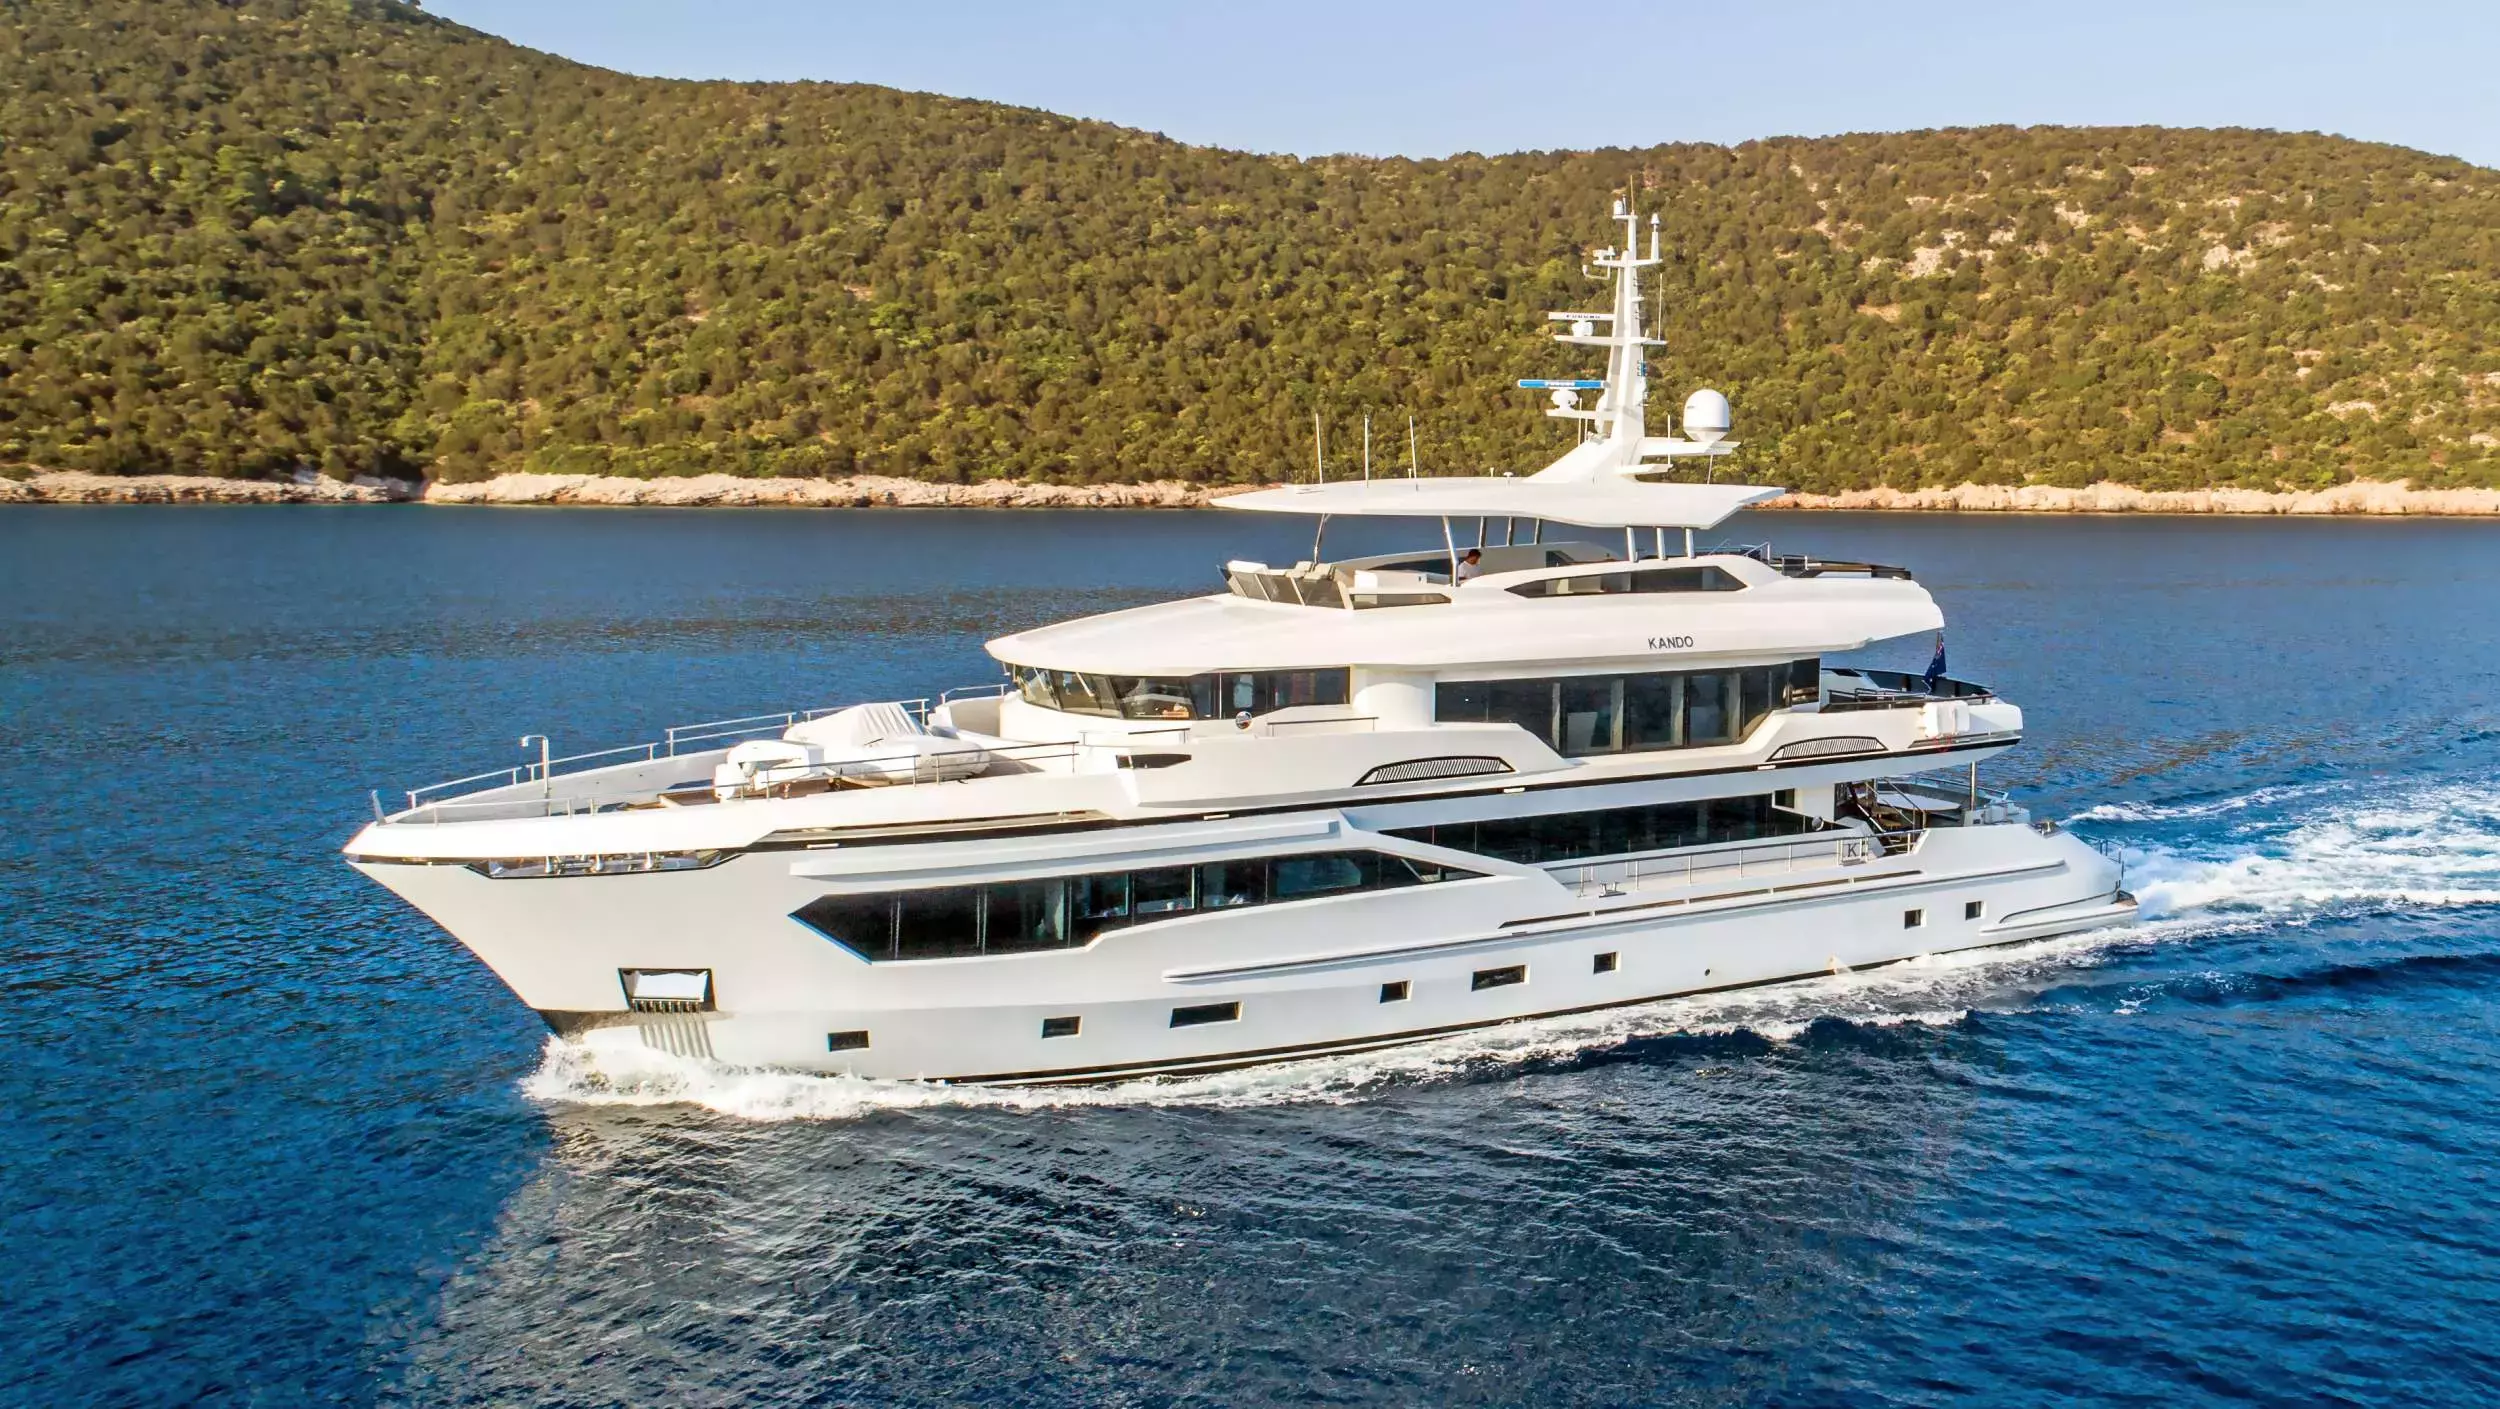 Kando by Custom Made - Top rates for a Charter of a private Motor Yacht in Turkey